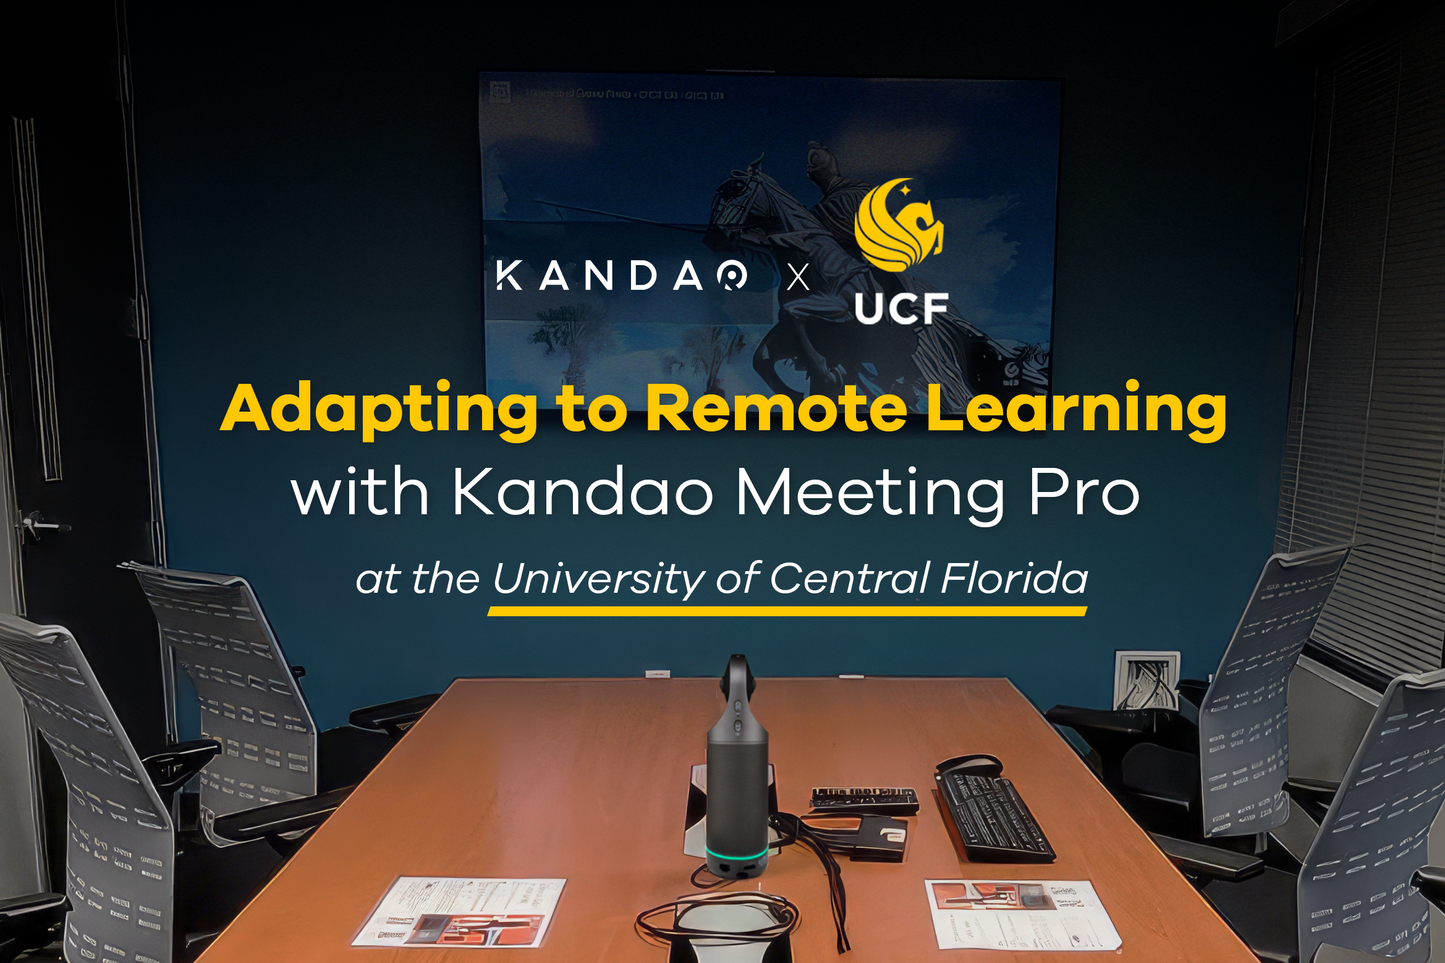 Adapting to Remote Learning with Kandao Meeting Pro at the University of Central Florida